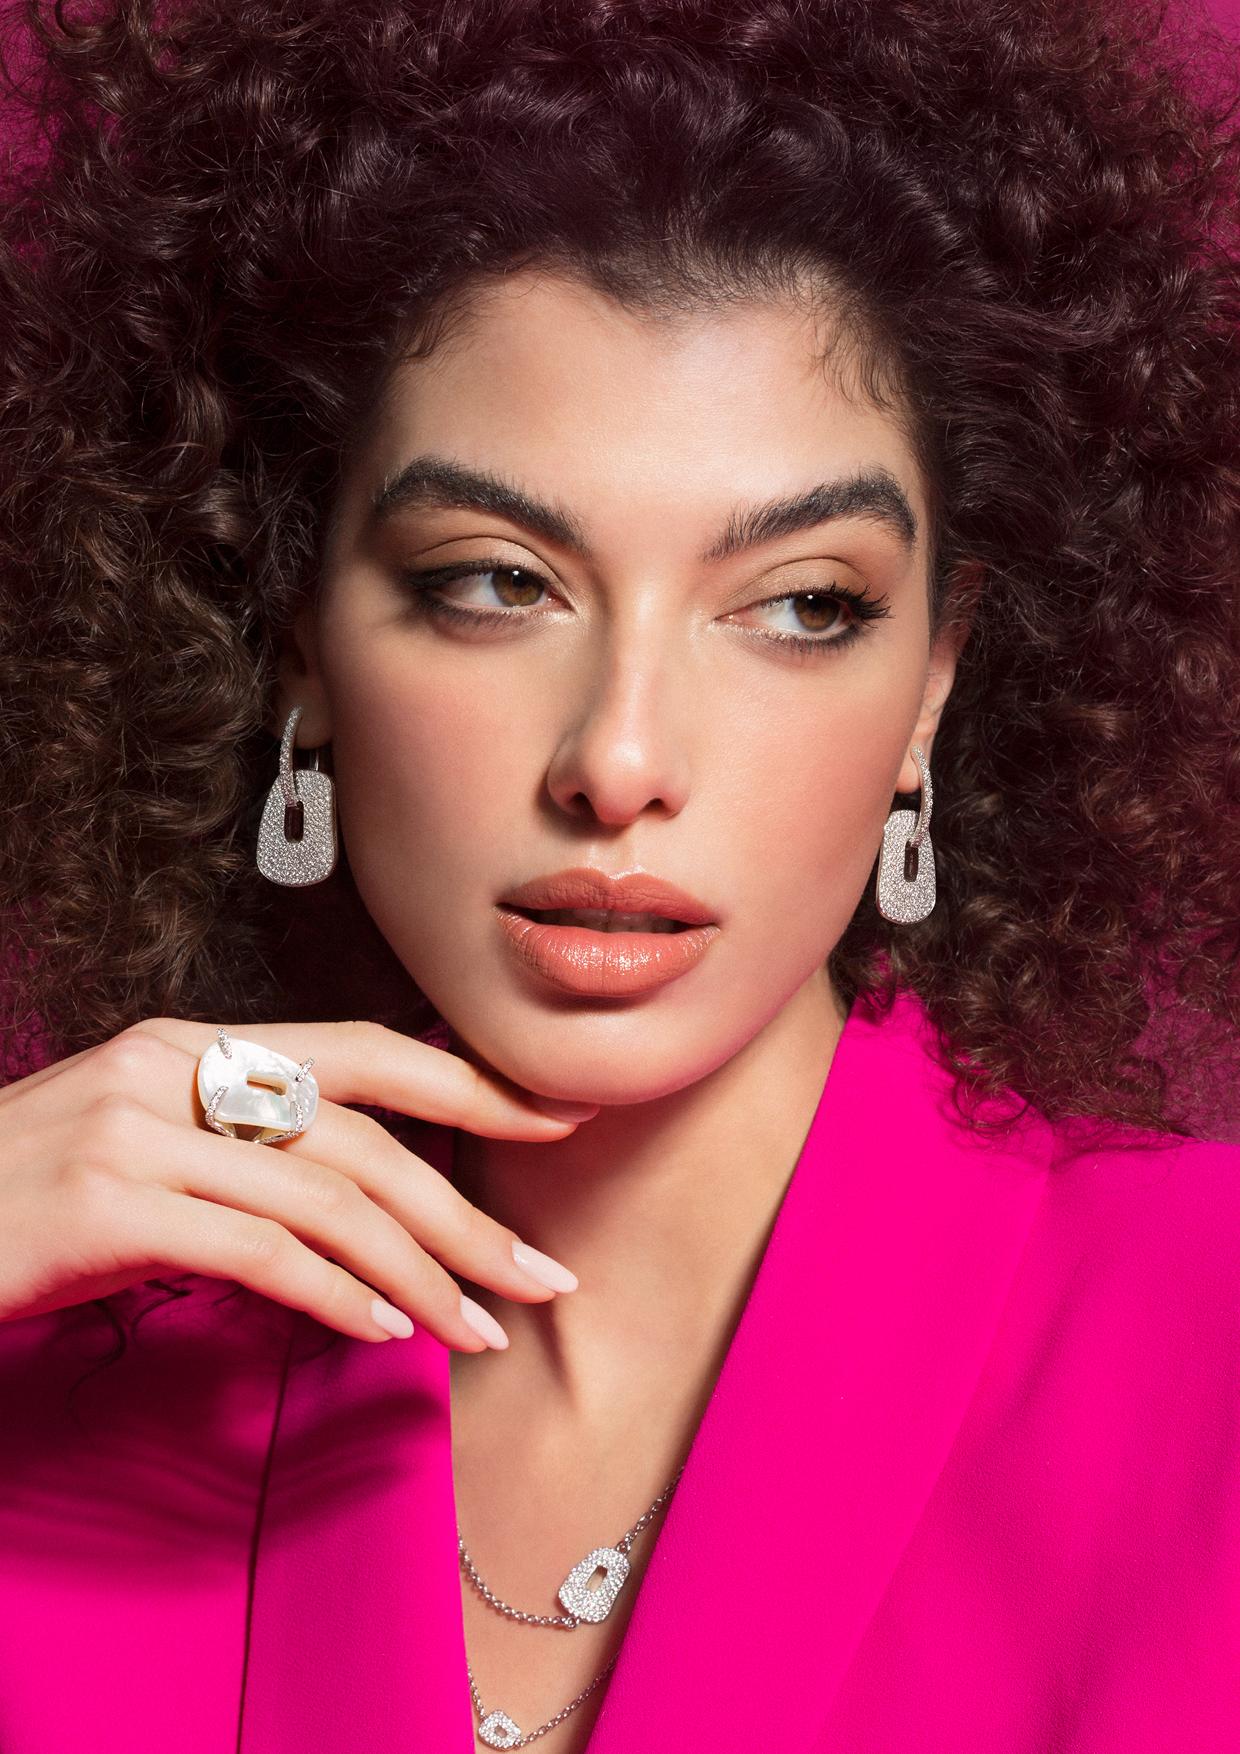 Earrings in rose gold and white diamonds (carats 0,30)
Also available in white gold, brown diamonds

EVE_R COLLECTION
The edgy and modern colors of turquoise, onyx and coral give life to Eve_r. The new collection is inspired by the iconic and